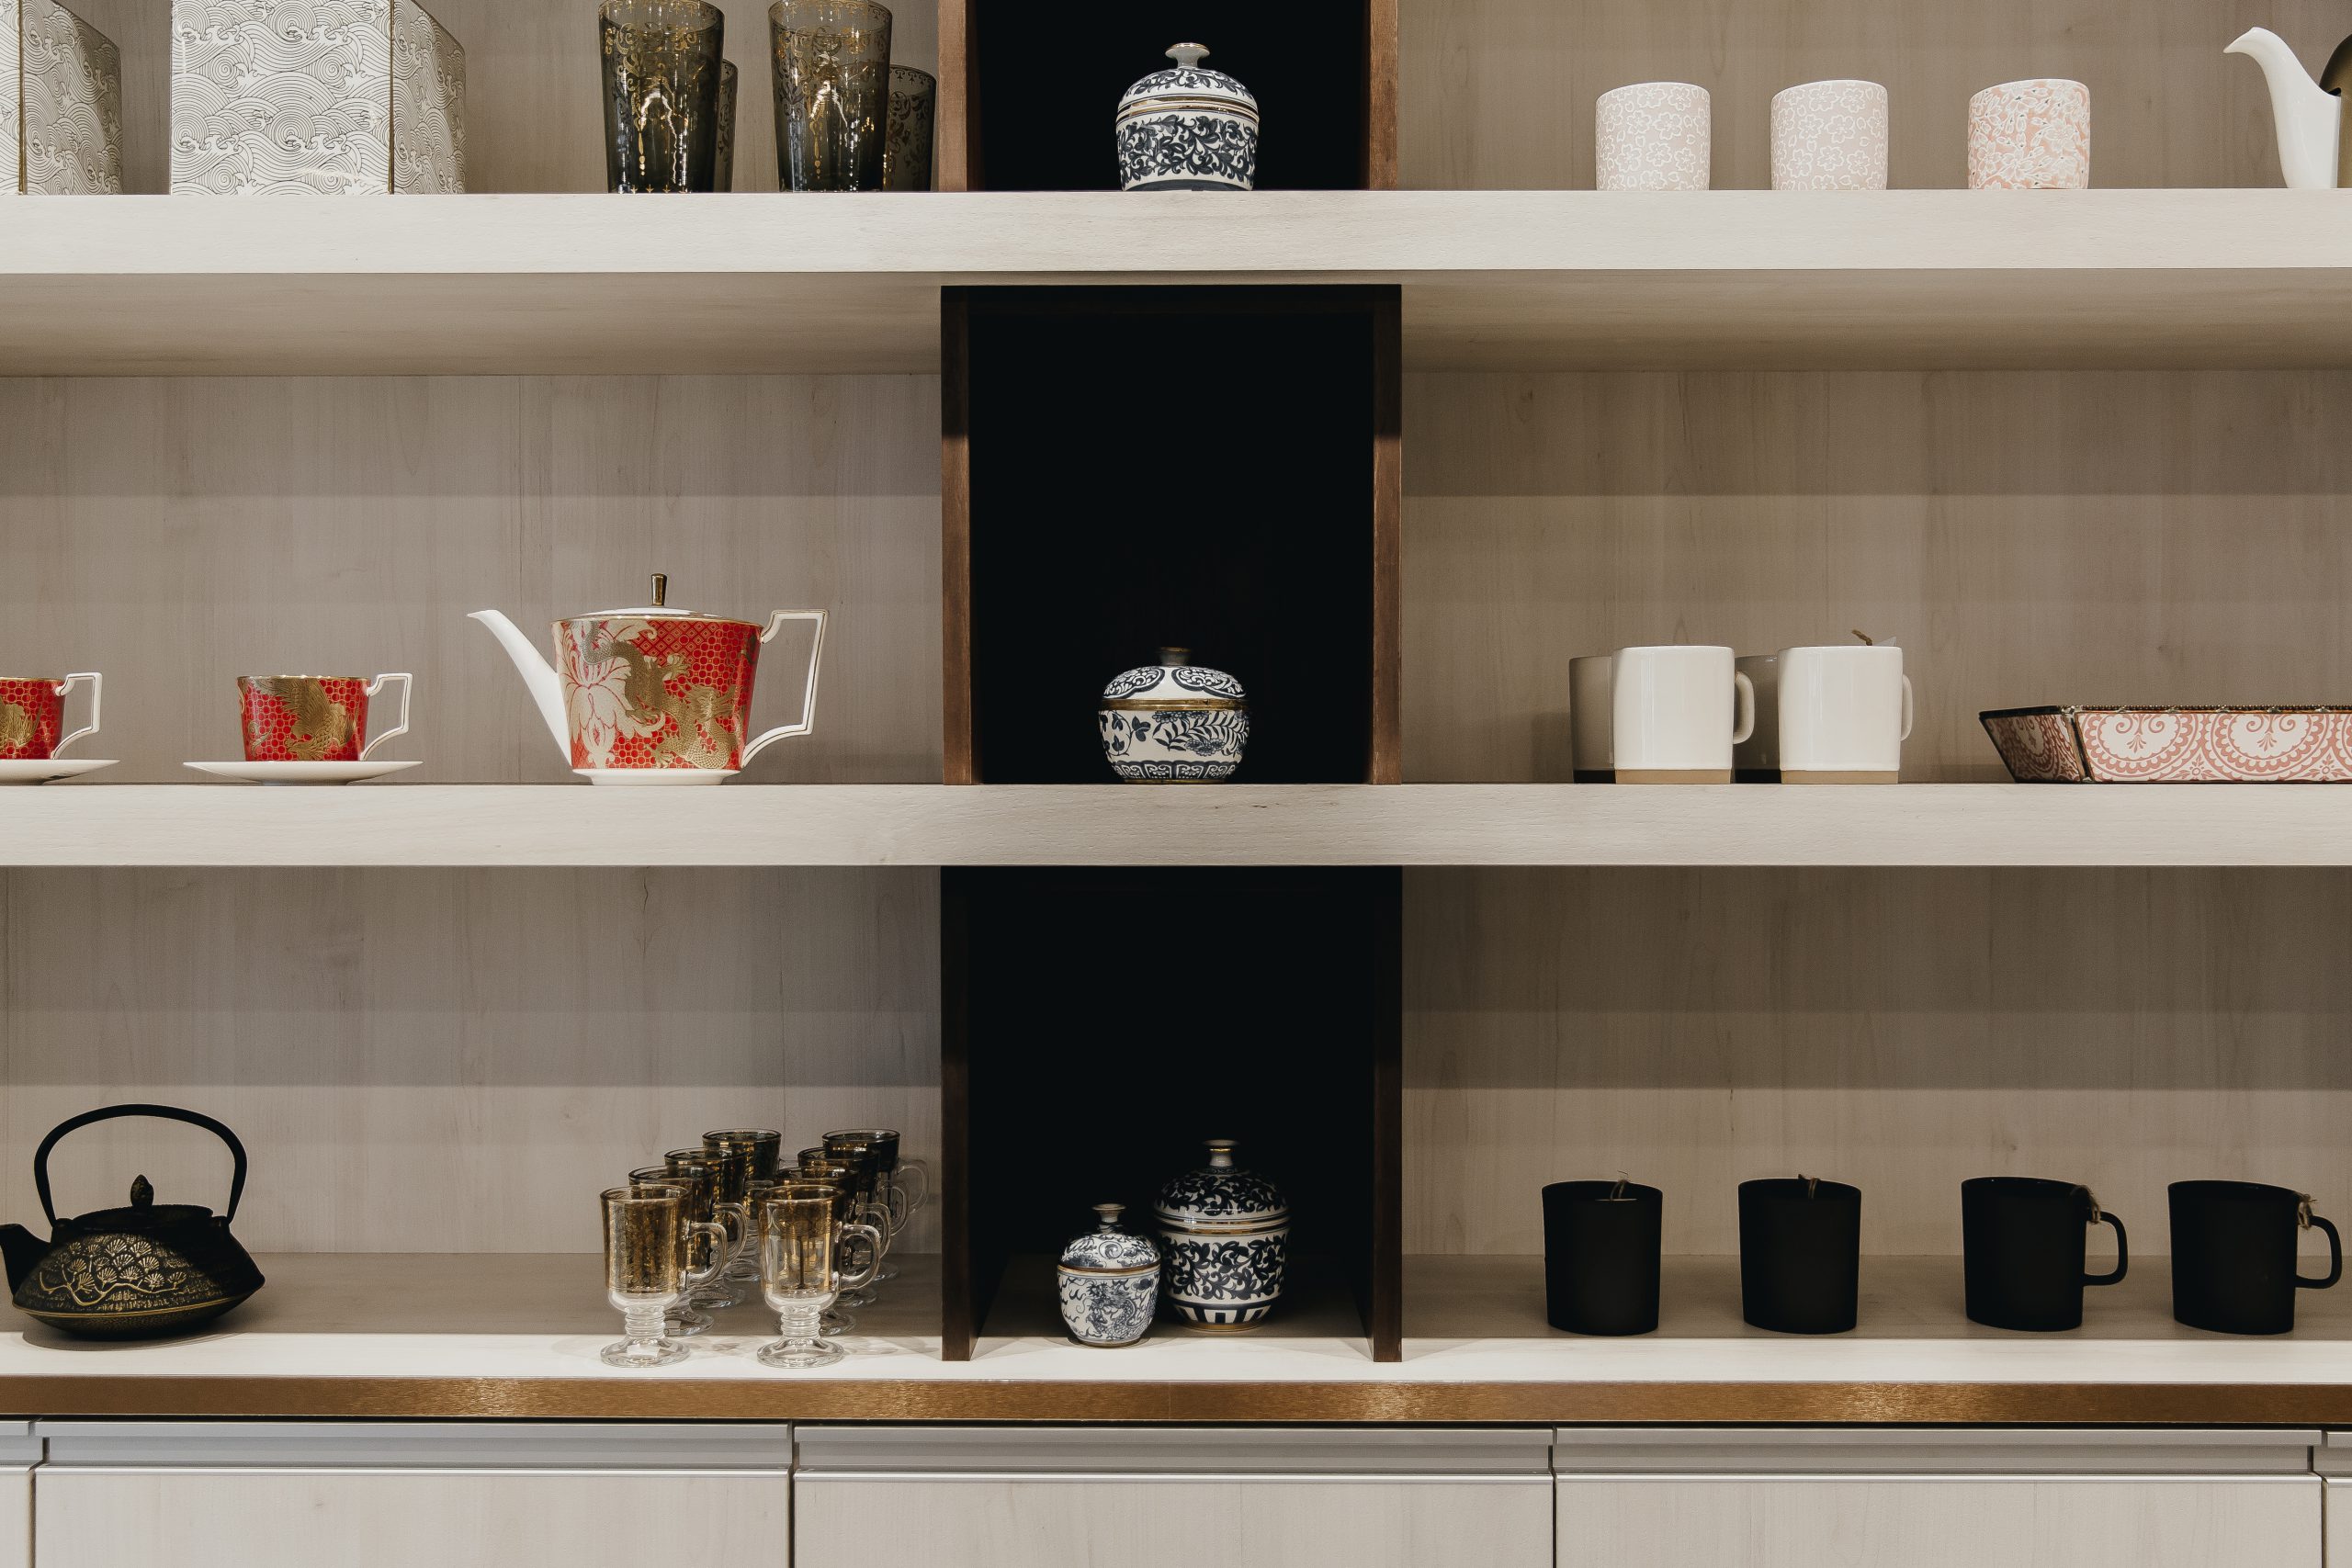 Silk Road Tea in Vancouver BC Retail Interior Design Store Shelves by Cutler